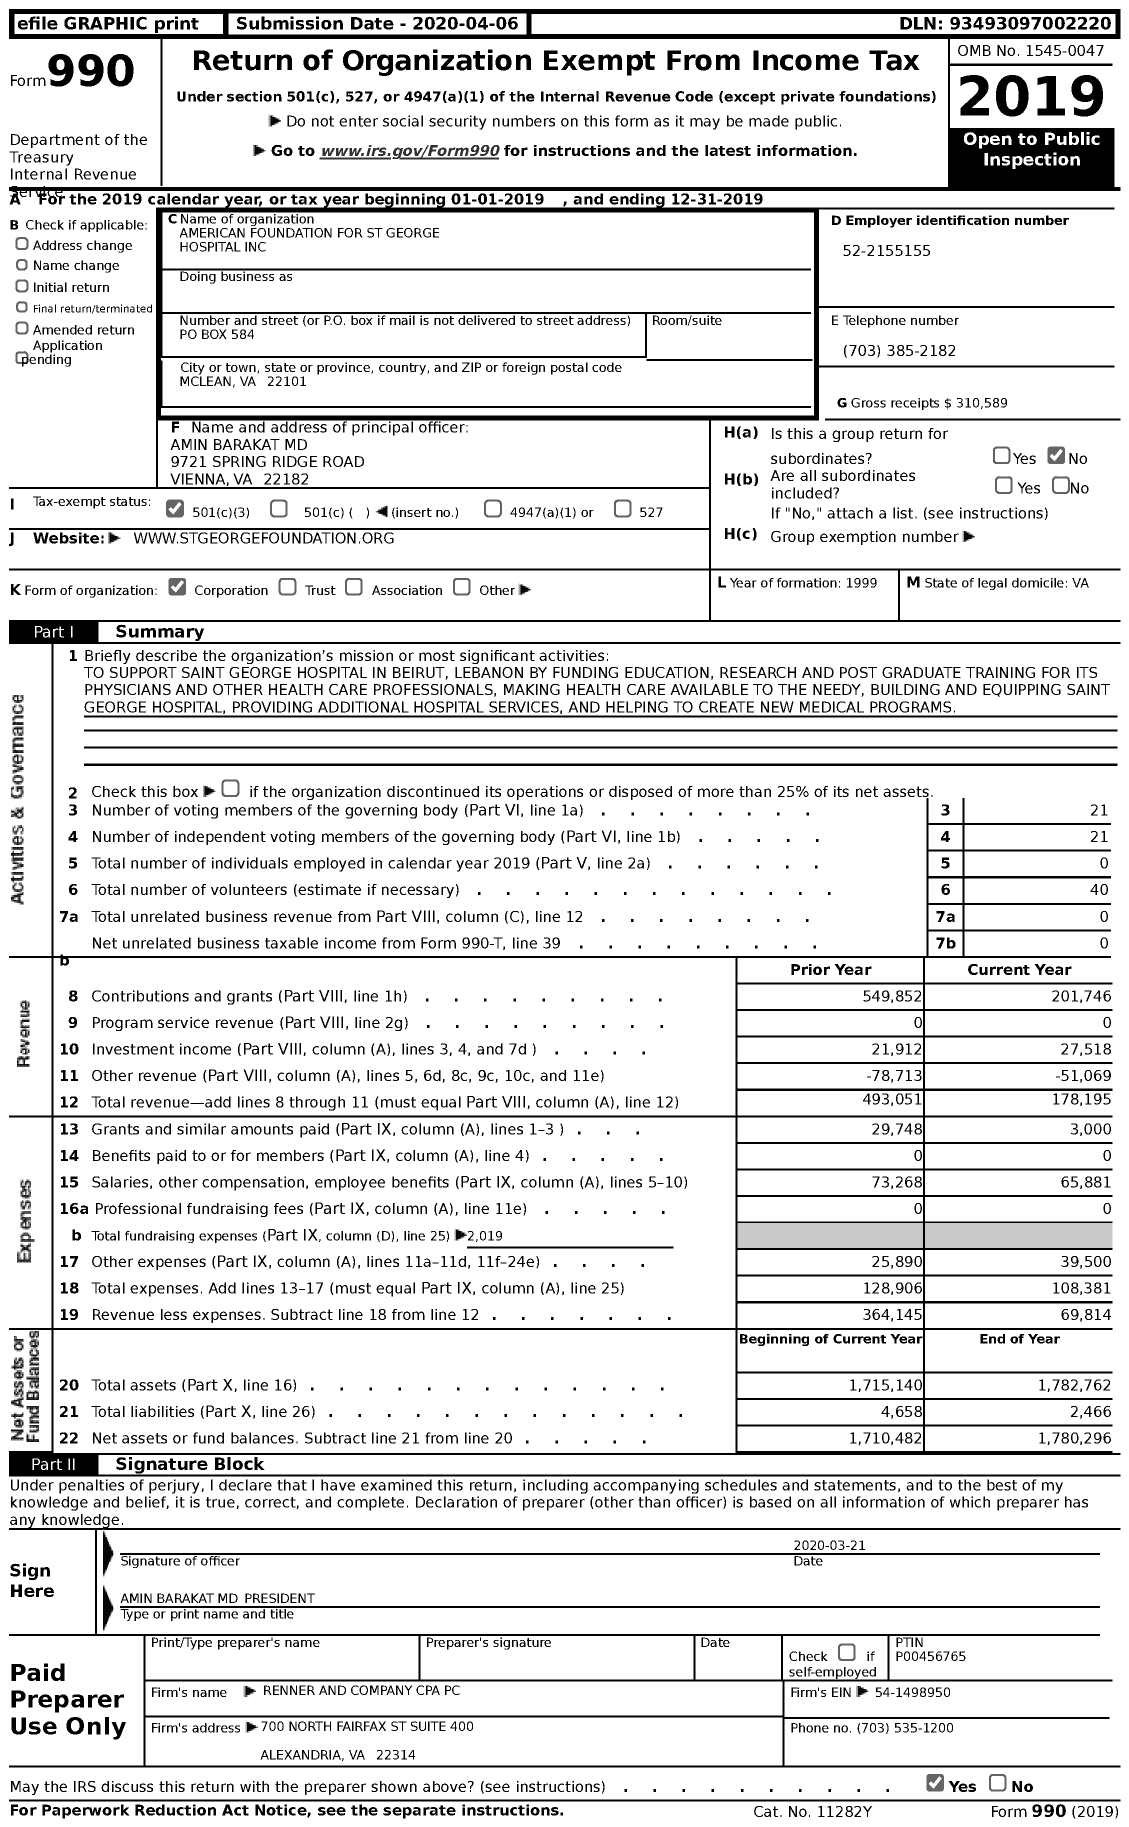 Image of first page of 2019 Form 990 for American Foundation for St George Hospital